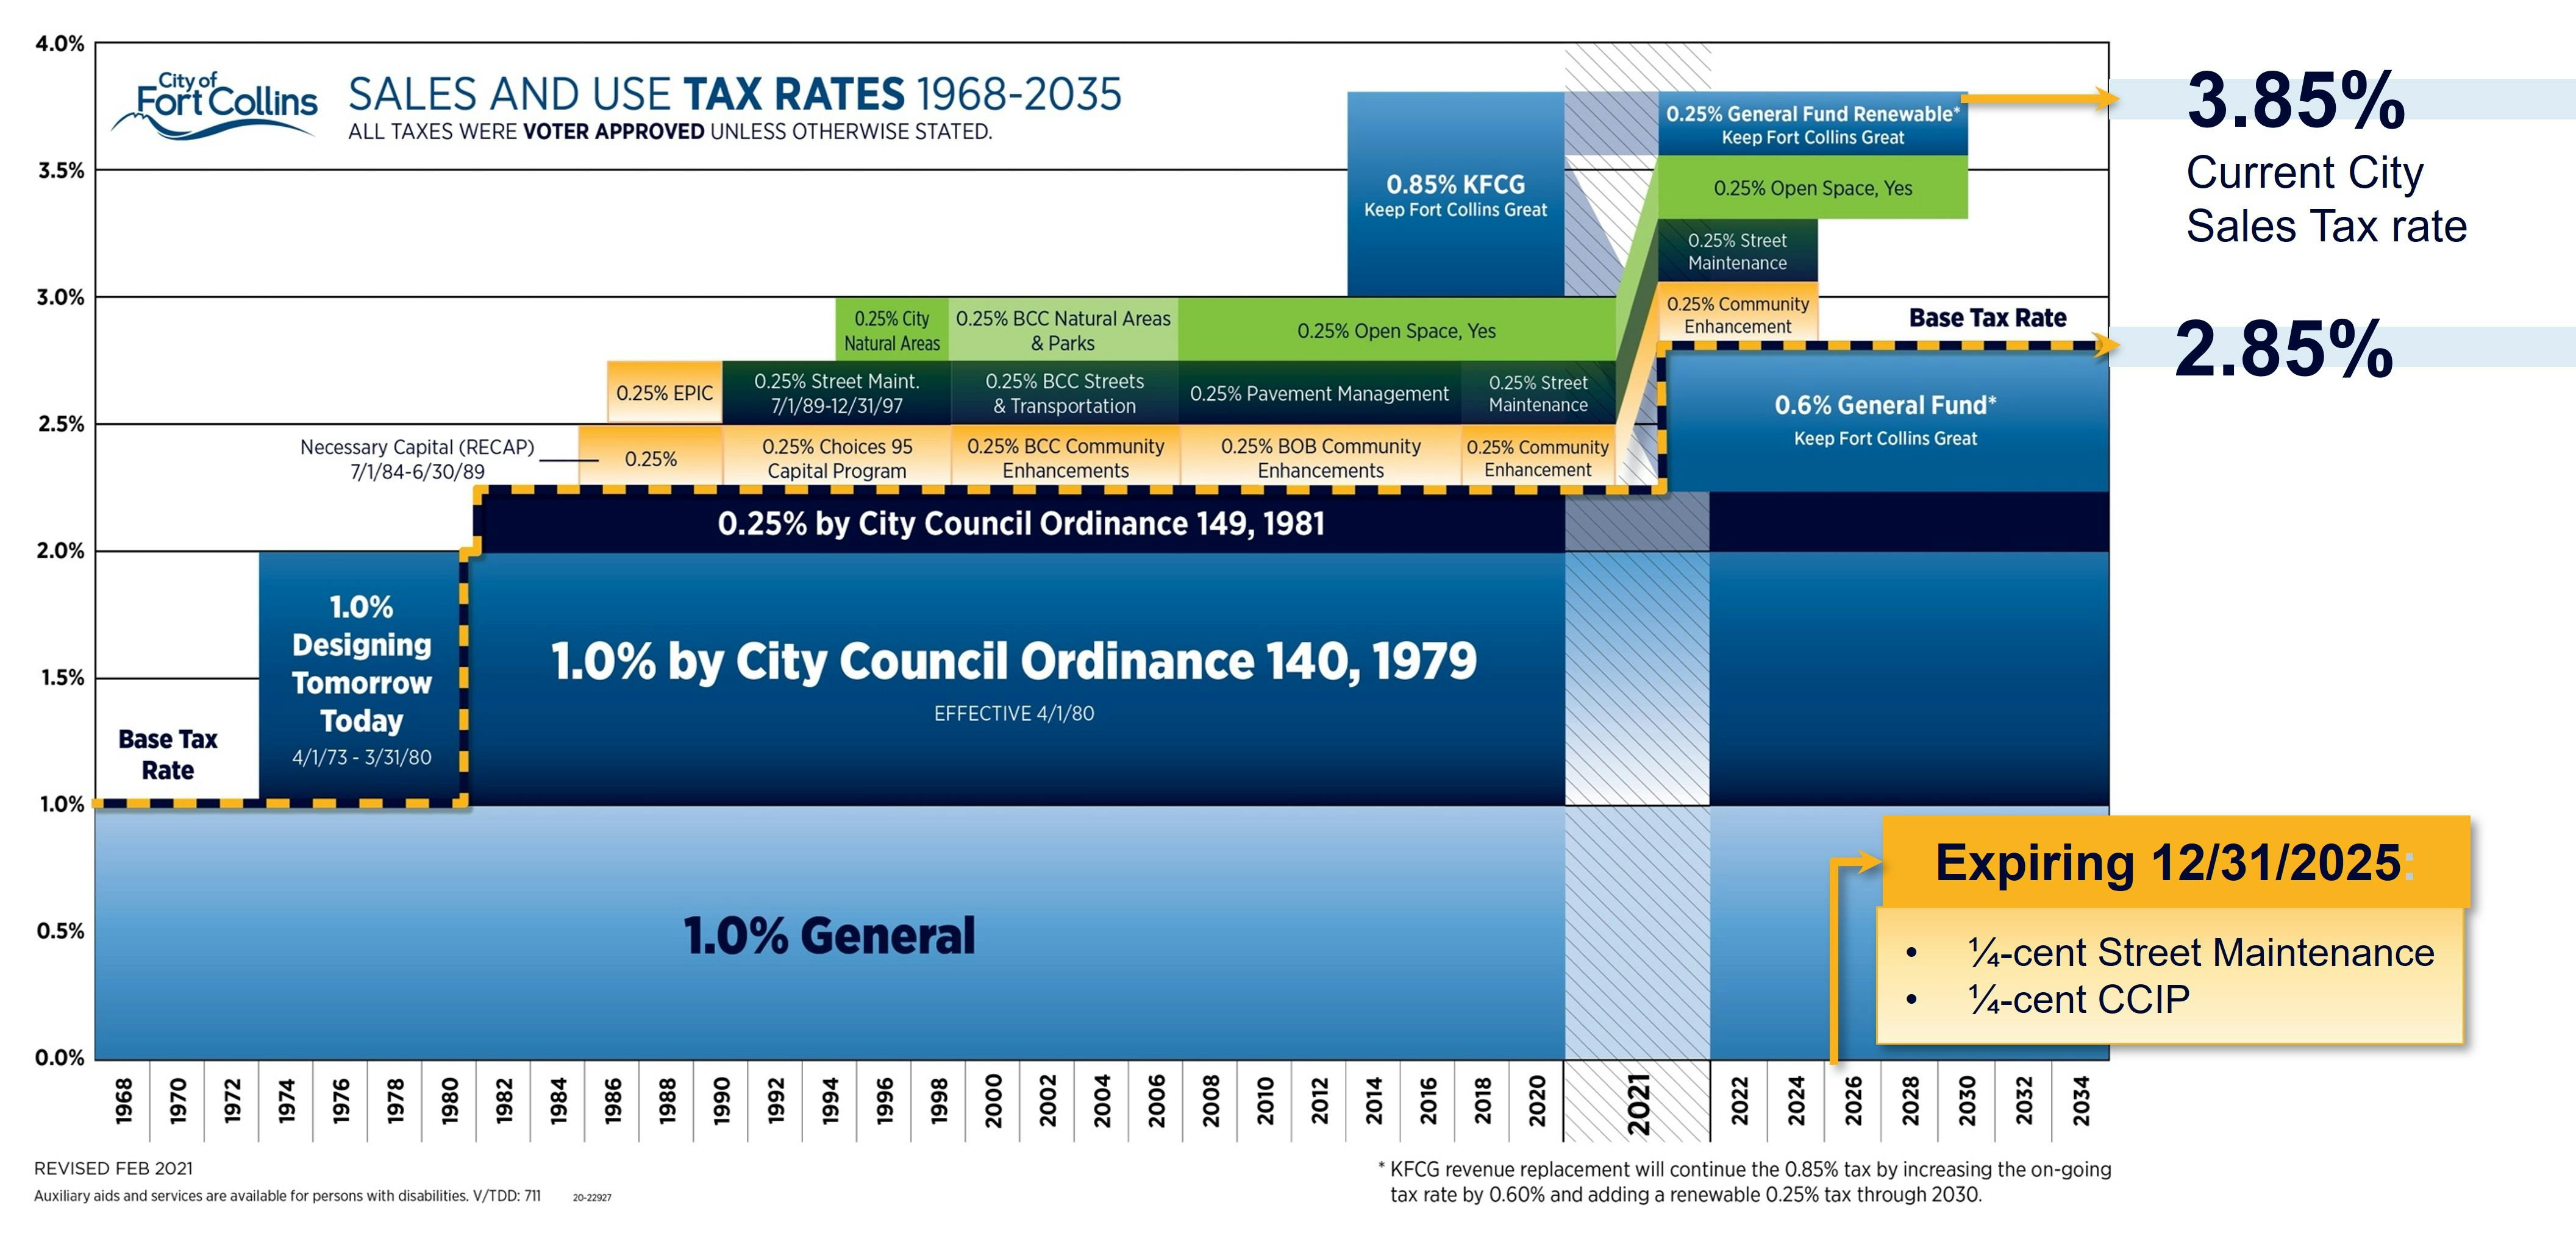 This outlines the Sales & Use Tax1968-2035 tax structure that has been voter-approved to date.